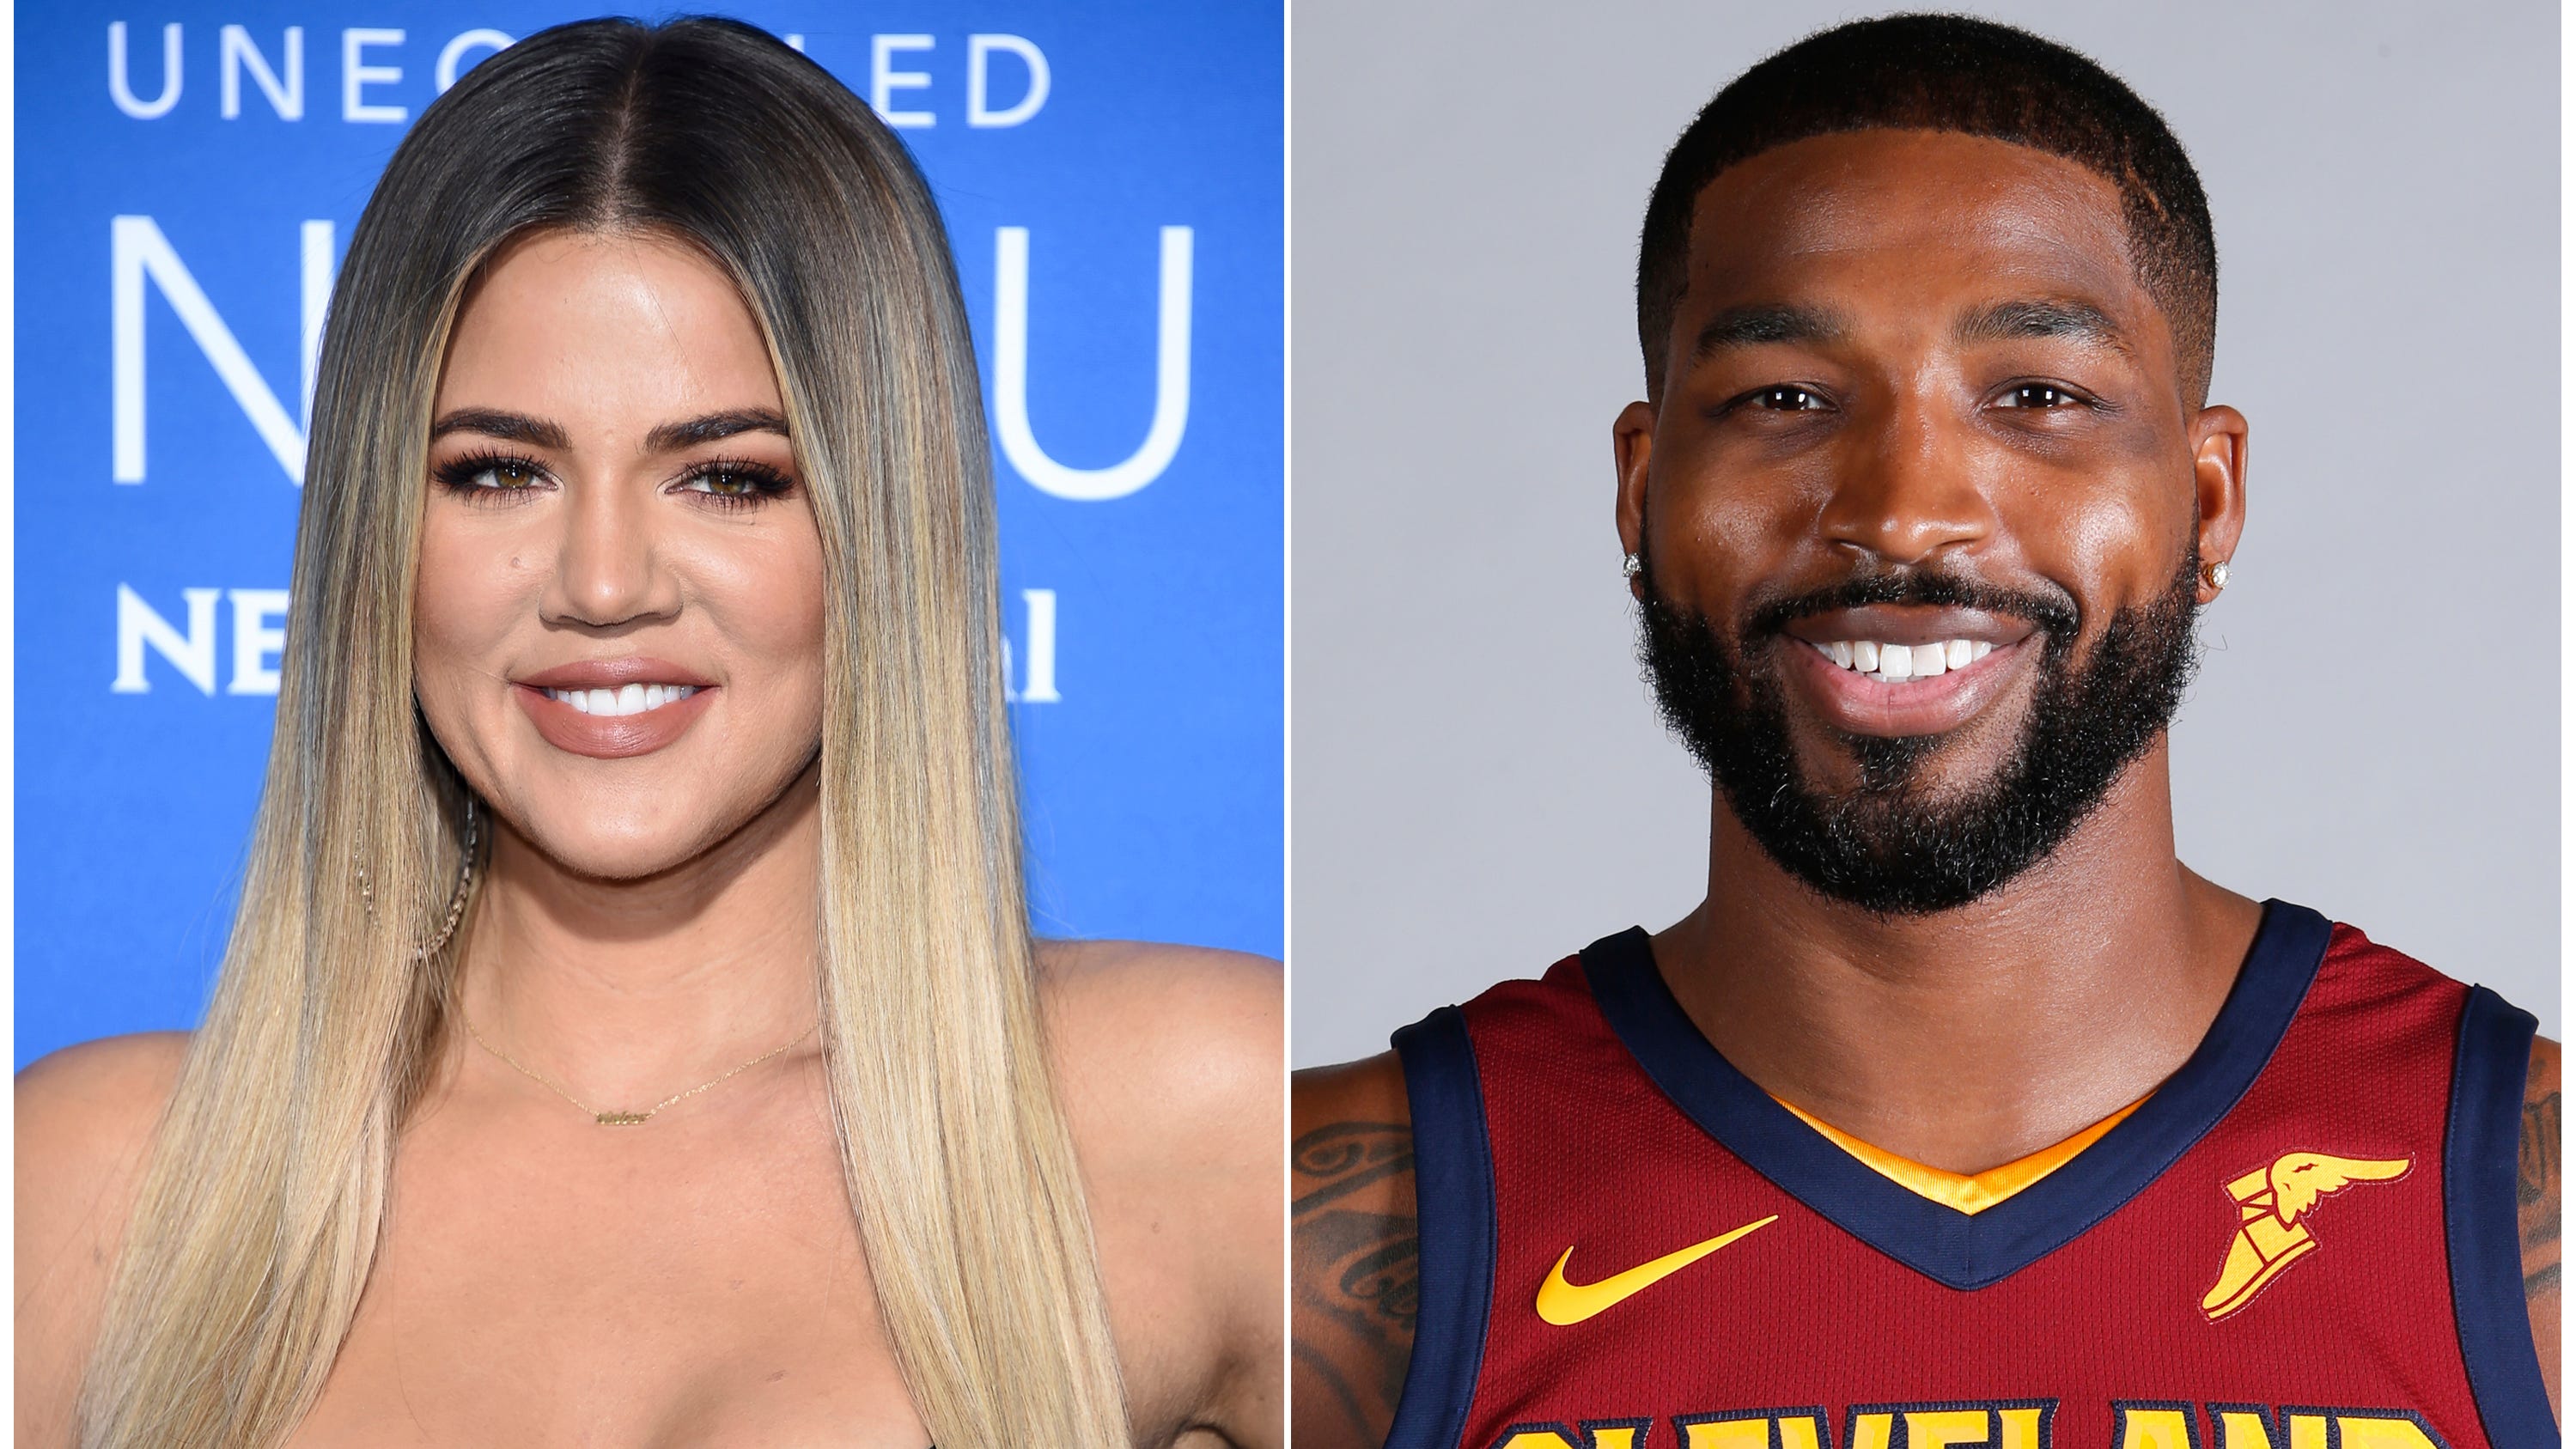 Khloé Kardashian, left, and ex Tristan Thompson welcomed their second child last August.